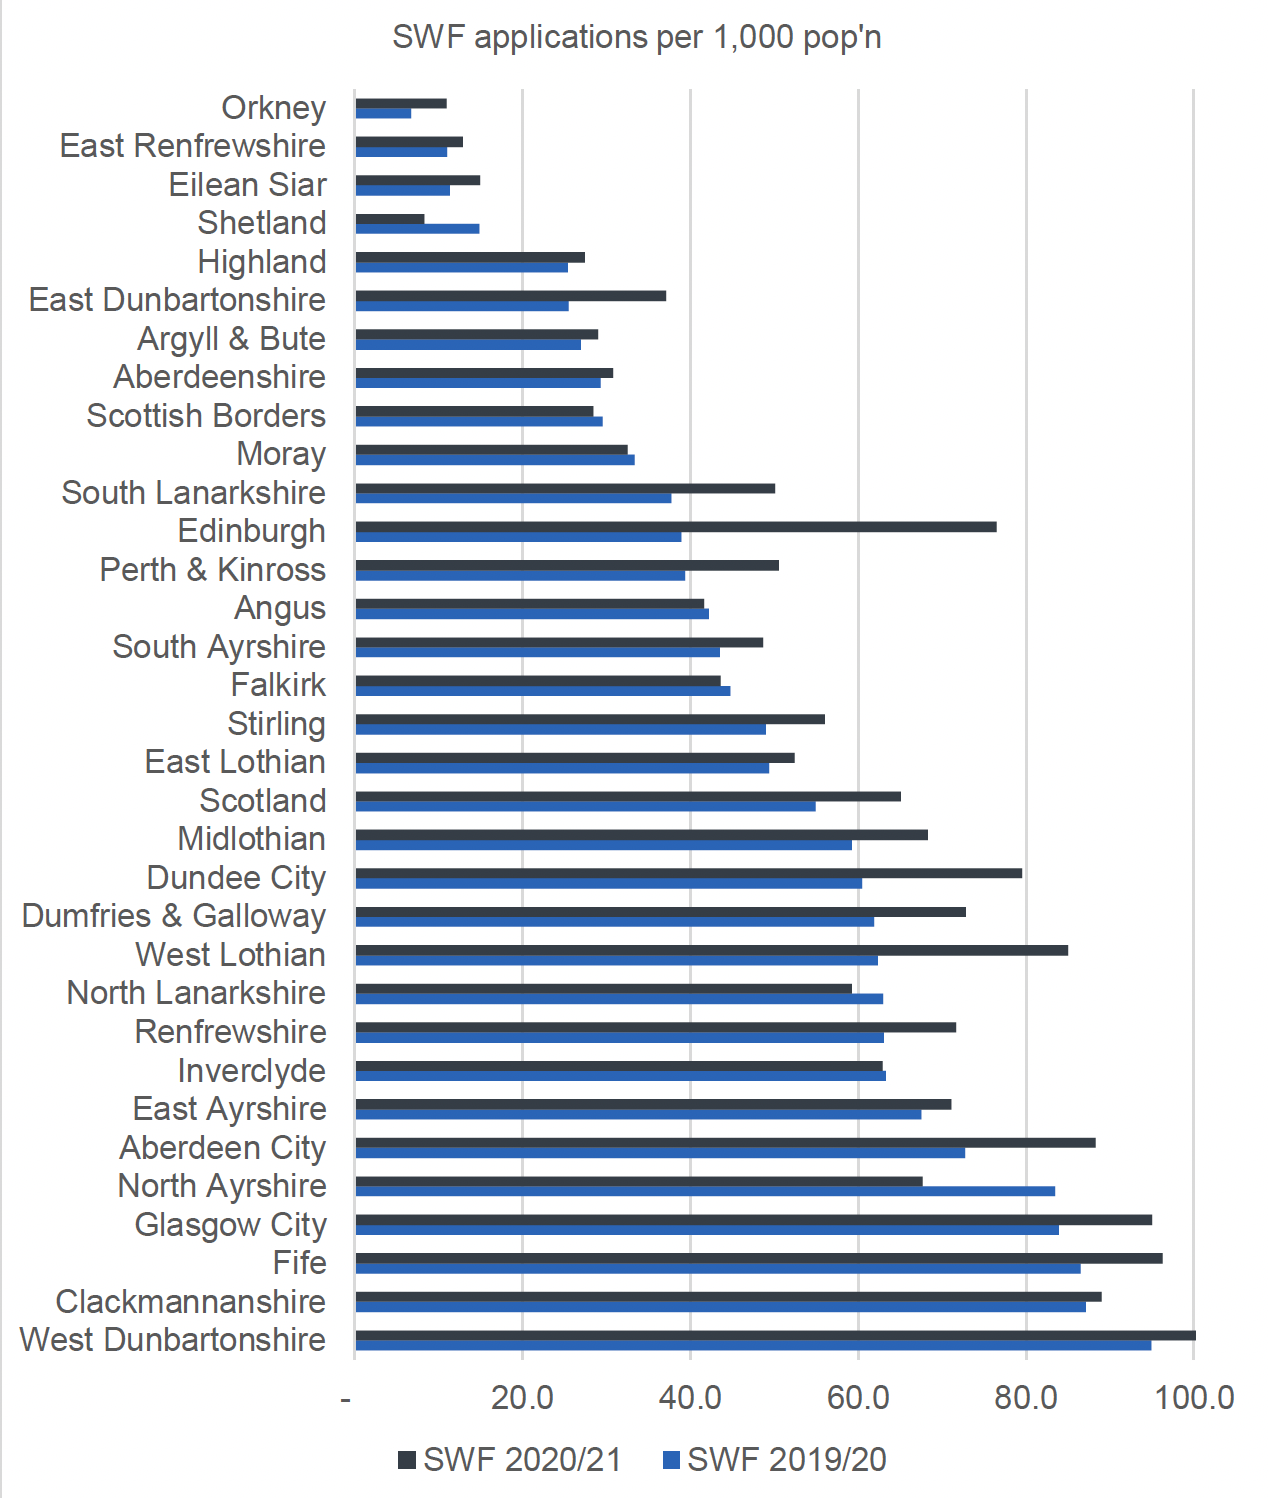 This figure shows a bar graph of application rates per 1,000 people across all local authorities for 2020/21 and 2019/20. The main patterns are described in the report text above and below the figure.